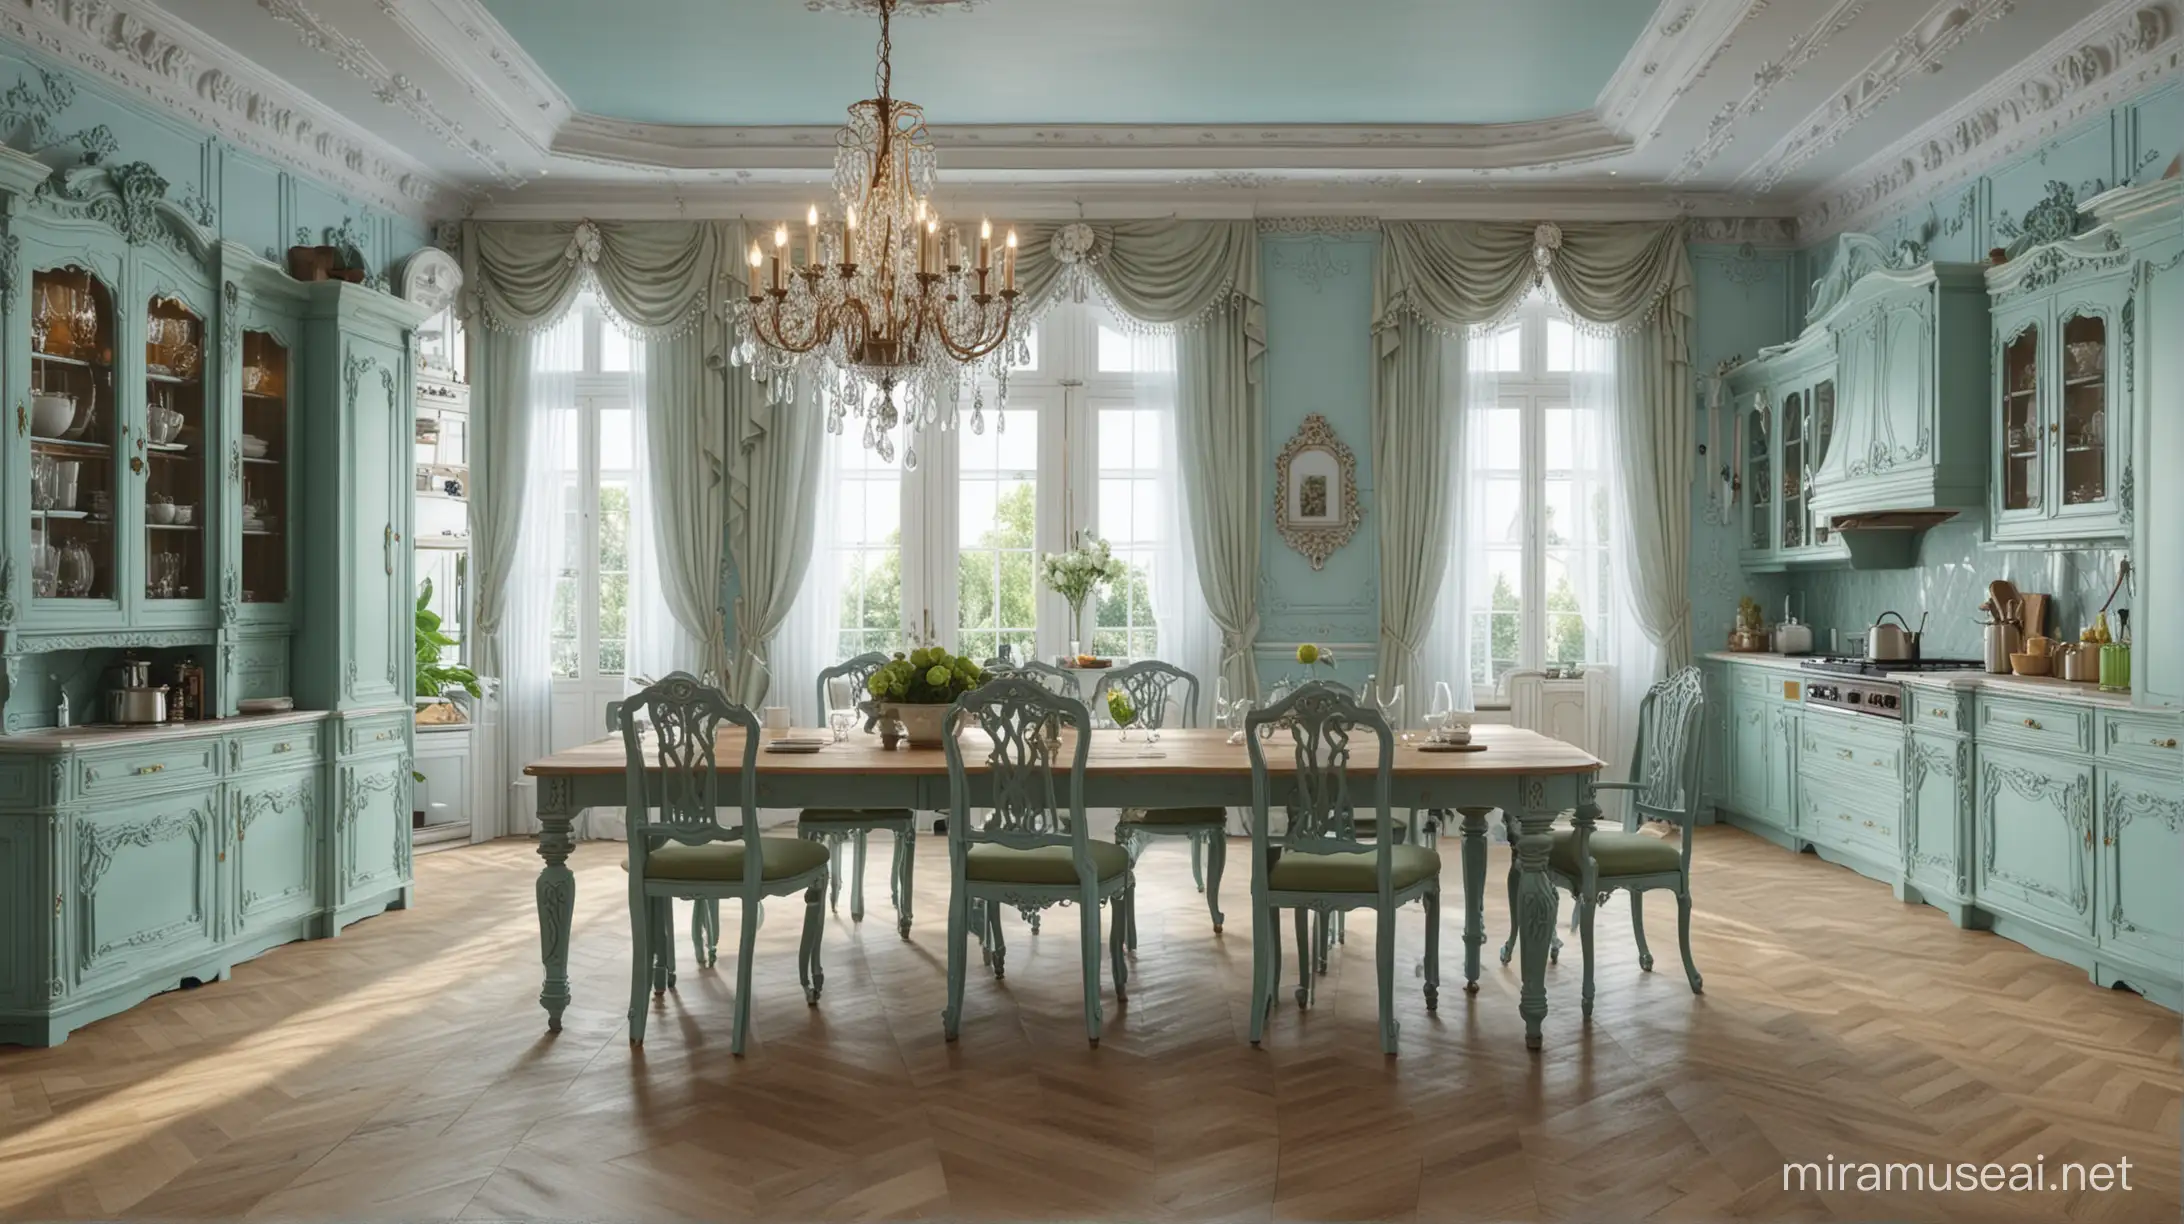  luxury kitchen in Baroque style in light blue and green with a chandelier, large island and dining table, interior design in the Baroque style, vintage furniture, kitchen cabinets, wood floor, french windows, high ceiling. 32k uhd, a high quality photography, realistic, Nikon d850